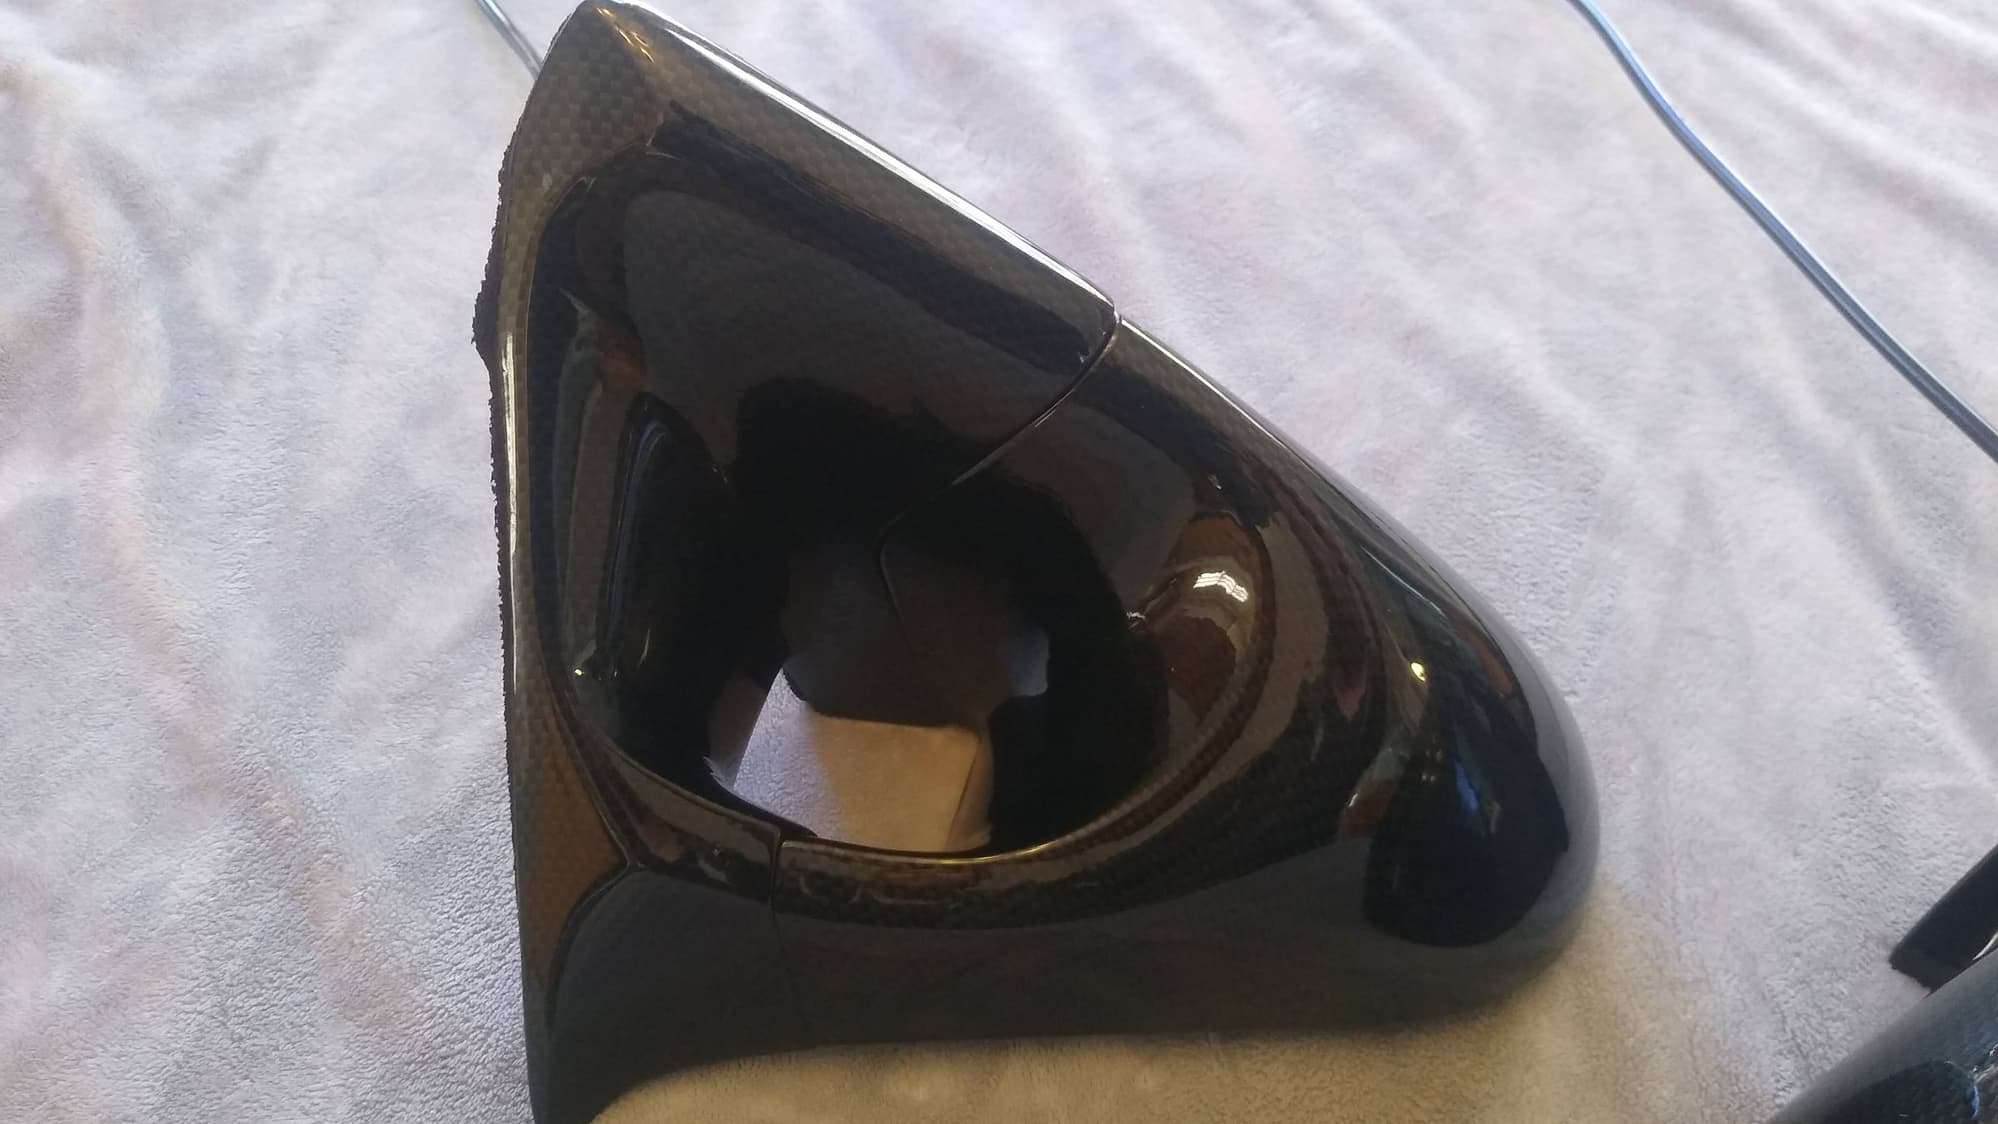 Exterior Body Parts - Ganador Mirrors for FD, Carbon Fiber Look, Very Nice Condition - Used - 1993 to 2002 Mazda RX-7 - Dawsonville, GA 30534, United States